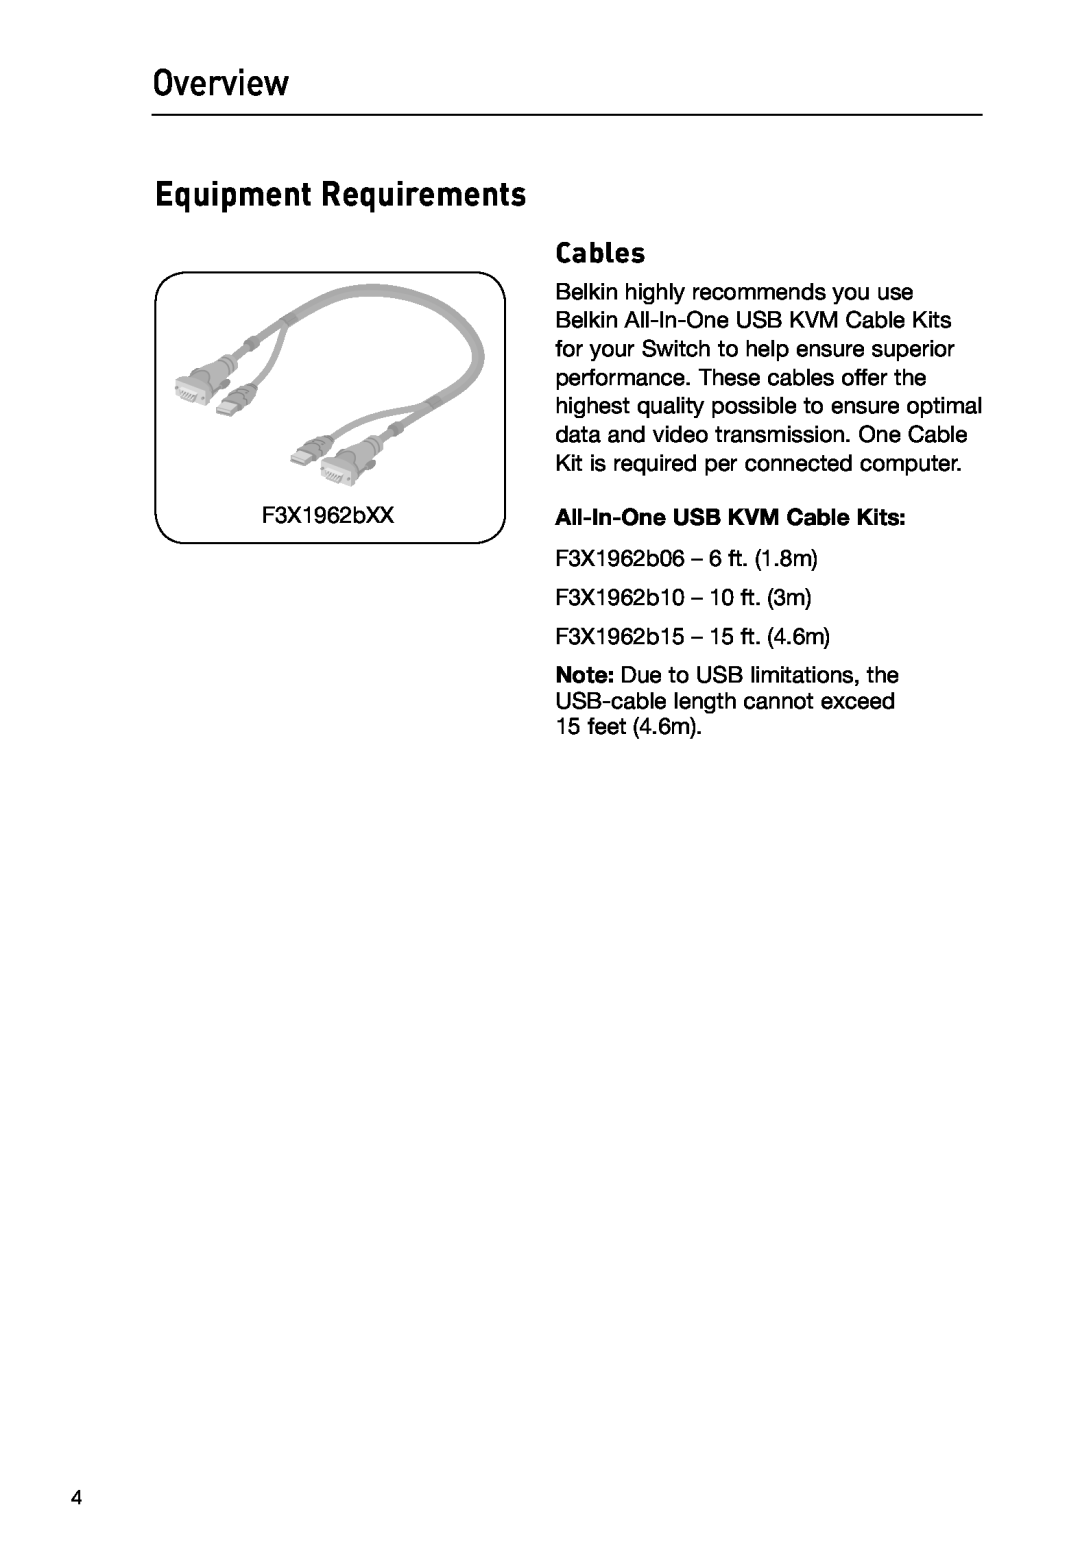 Belkin P75209 manual Equipment Requirements, Cables, Overview 